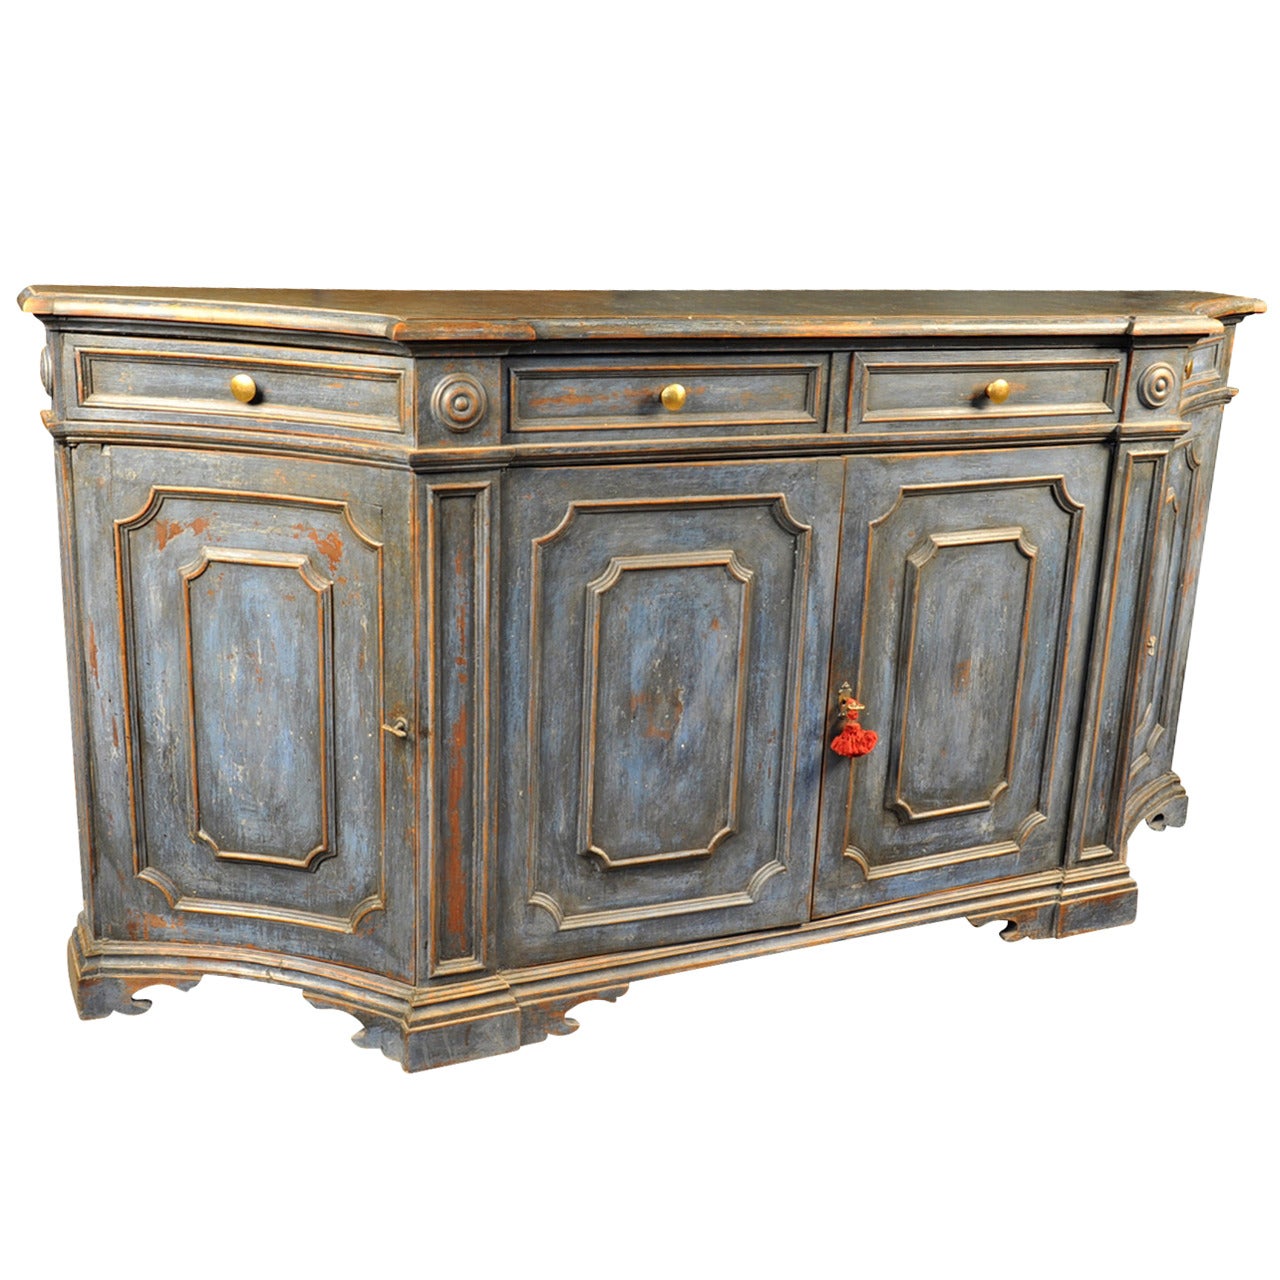 Late 19th Century Italian Credenza In Painted Wood